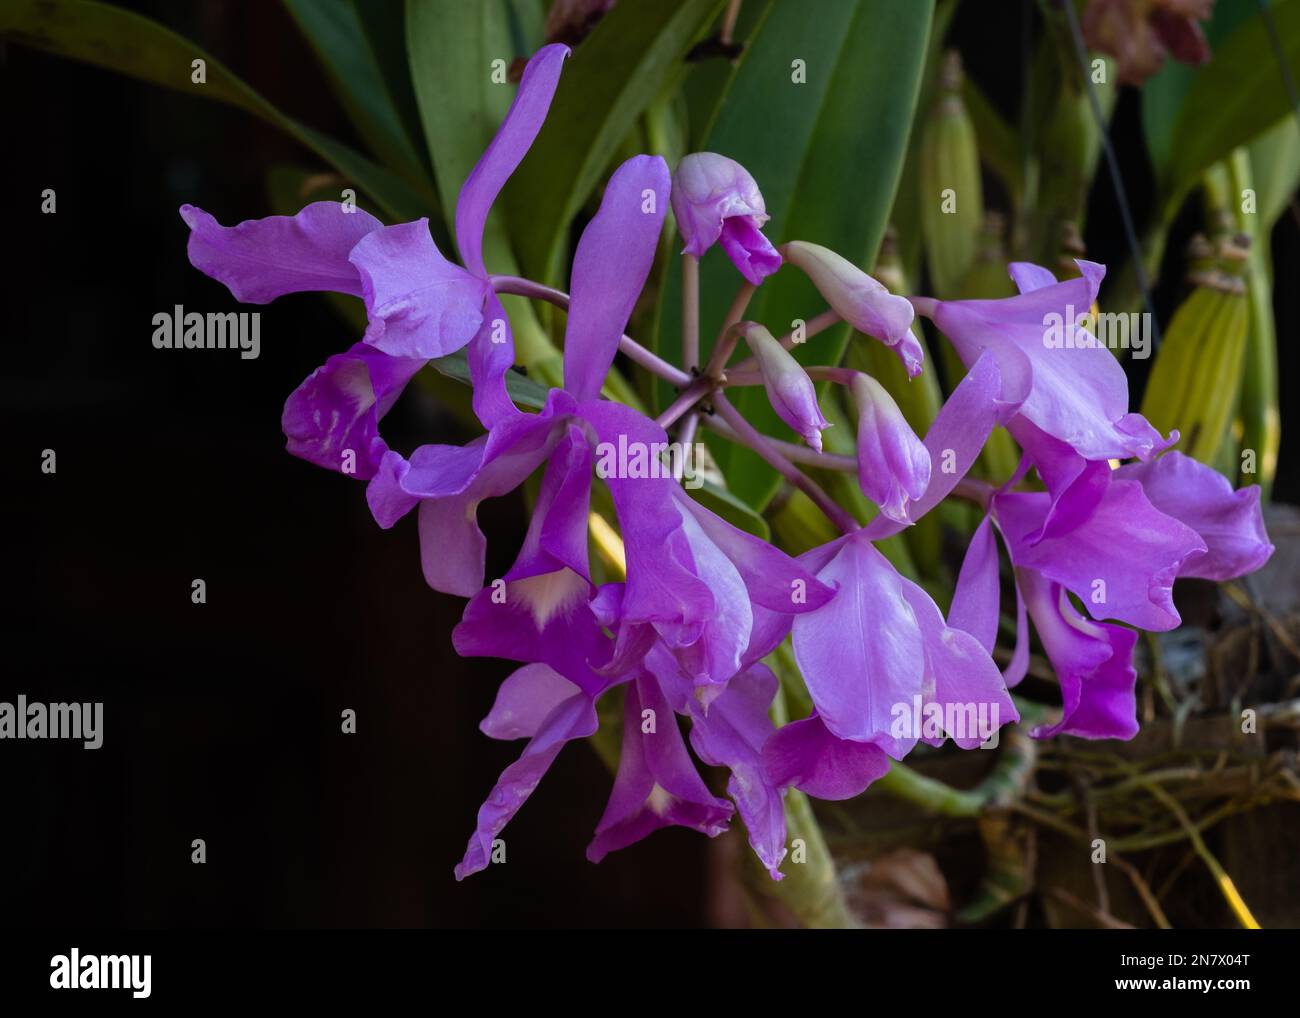 Closeup view of bright purple flowers of cattleya orchid hybrid blooming outdoors on black background Stock Photo